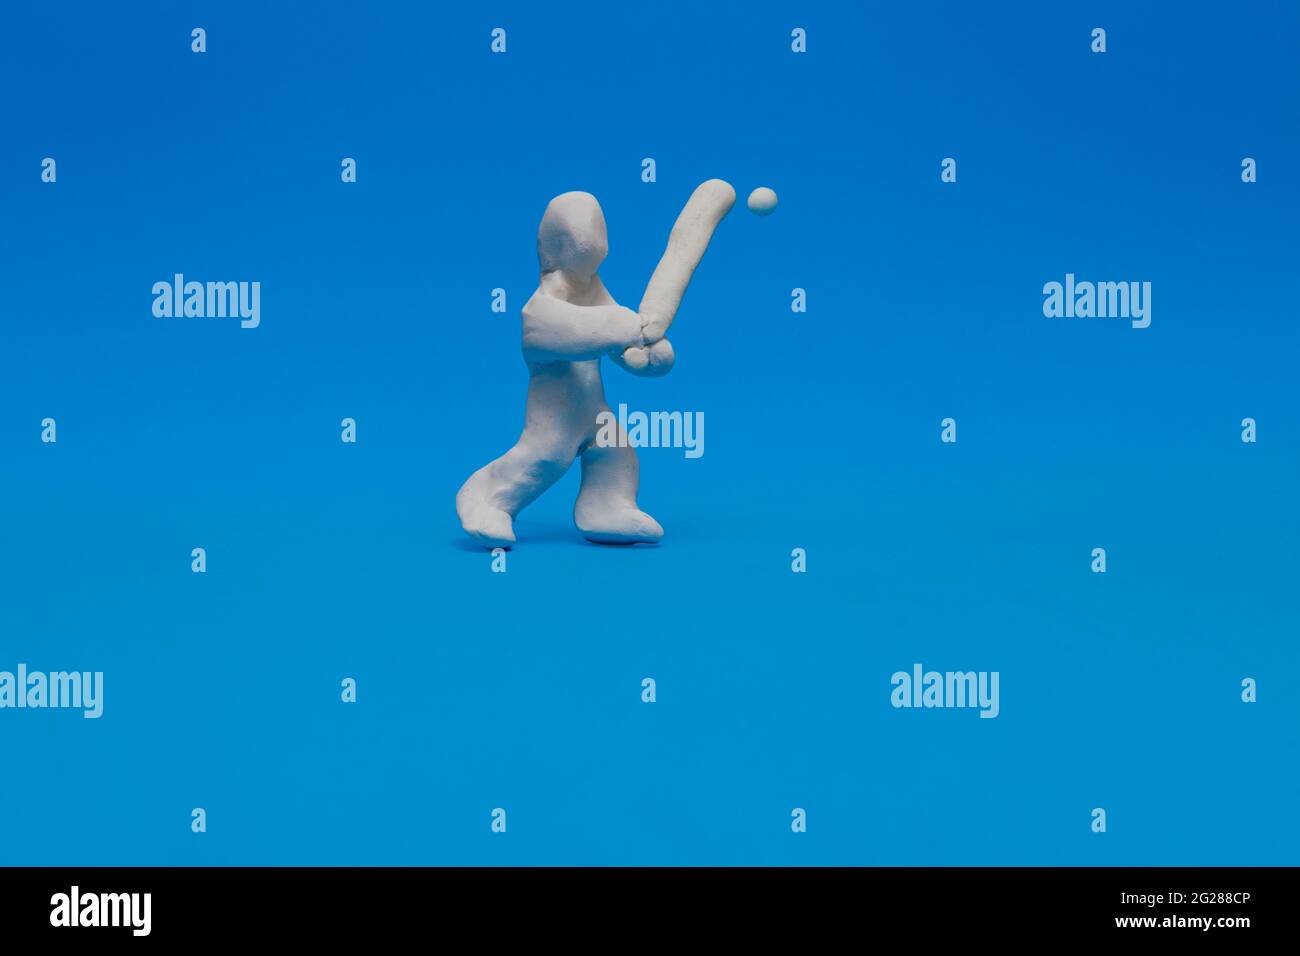 A white plasticine doll practicing baseball on a blue background. The doll is a batter and holds the bat ready to hit the ball coming towards him. Stock Photo